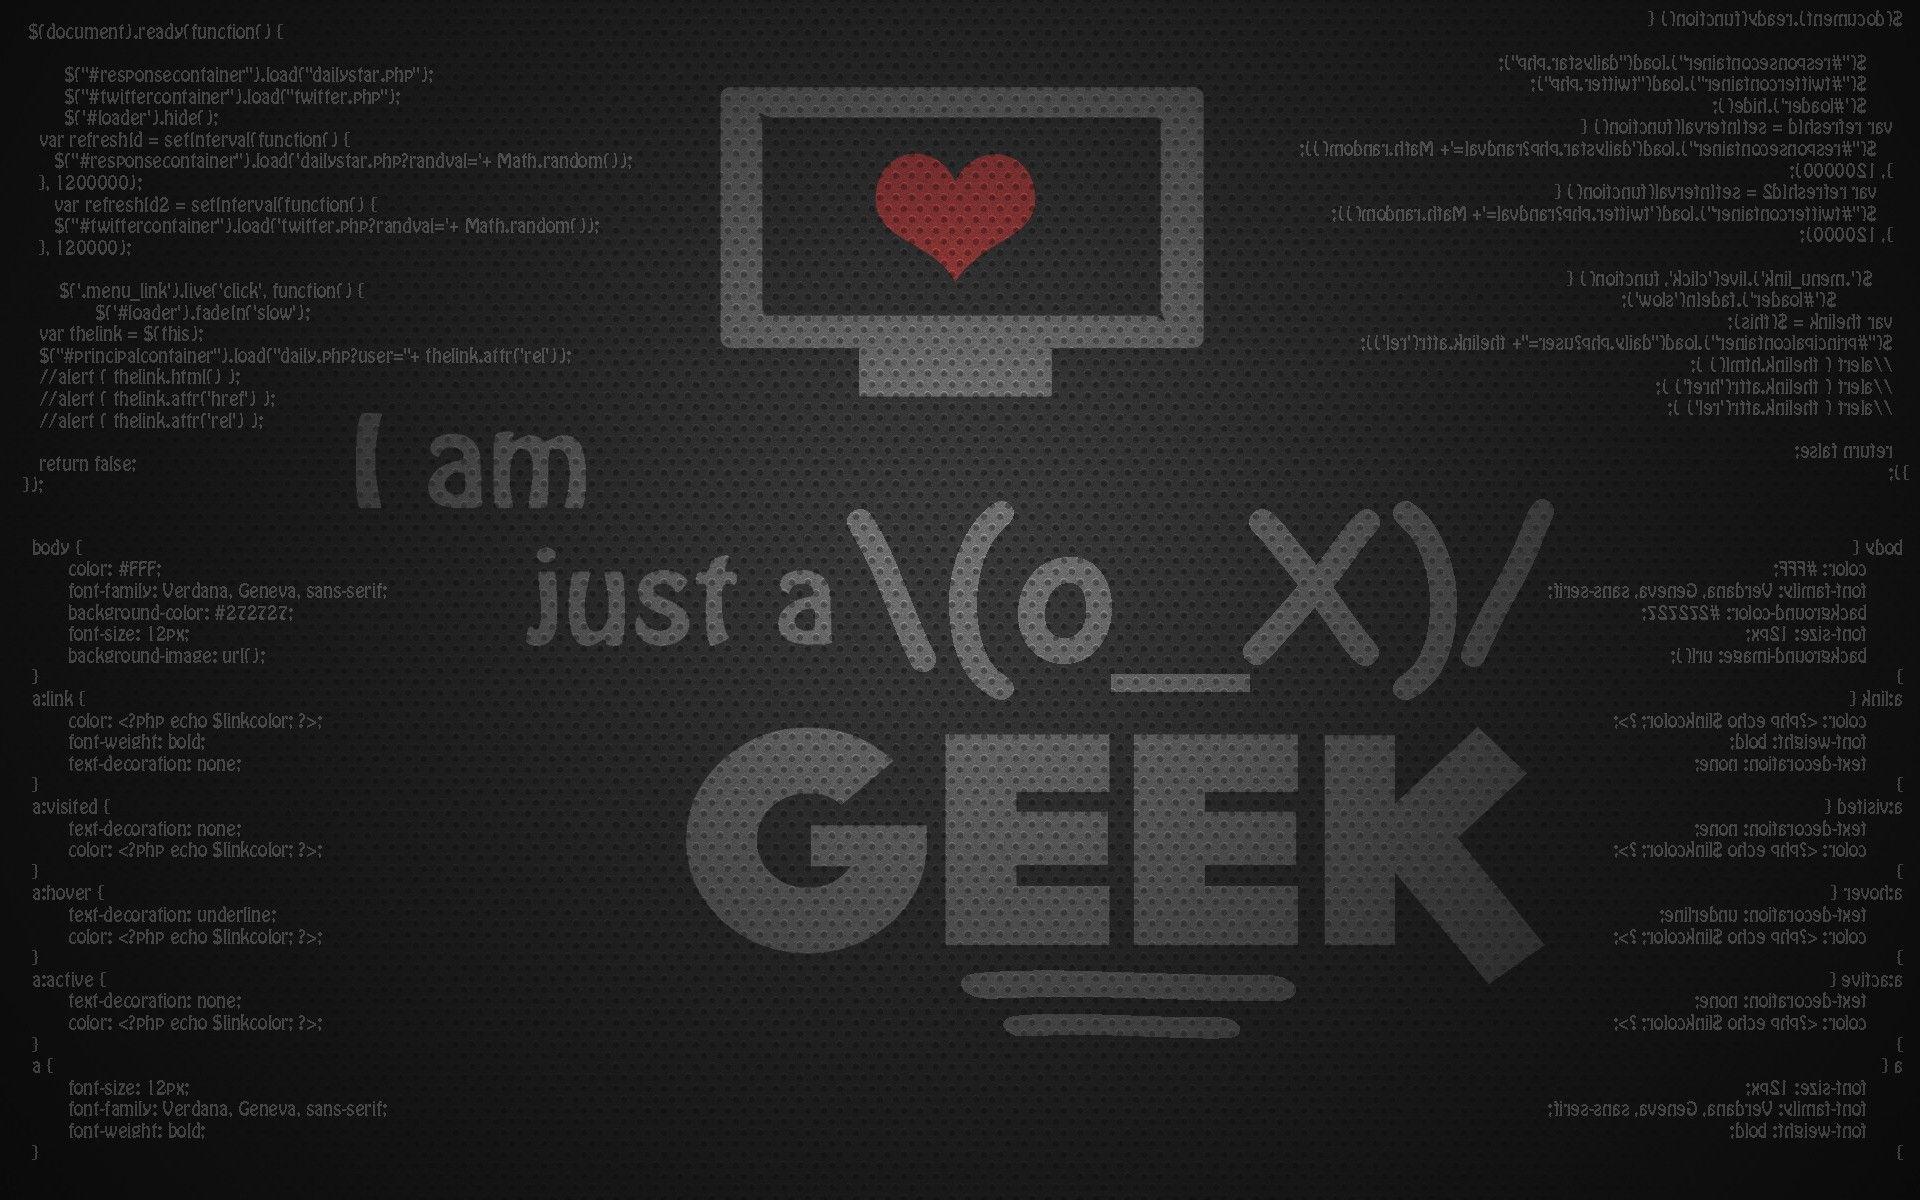 Wallpaper Of The Day: Geekx1200px Geek Image